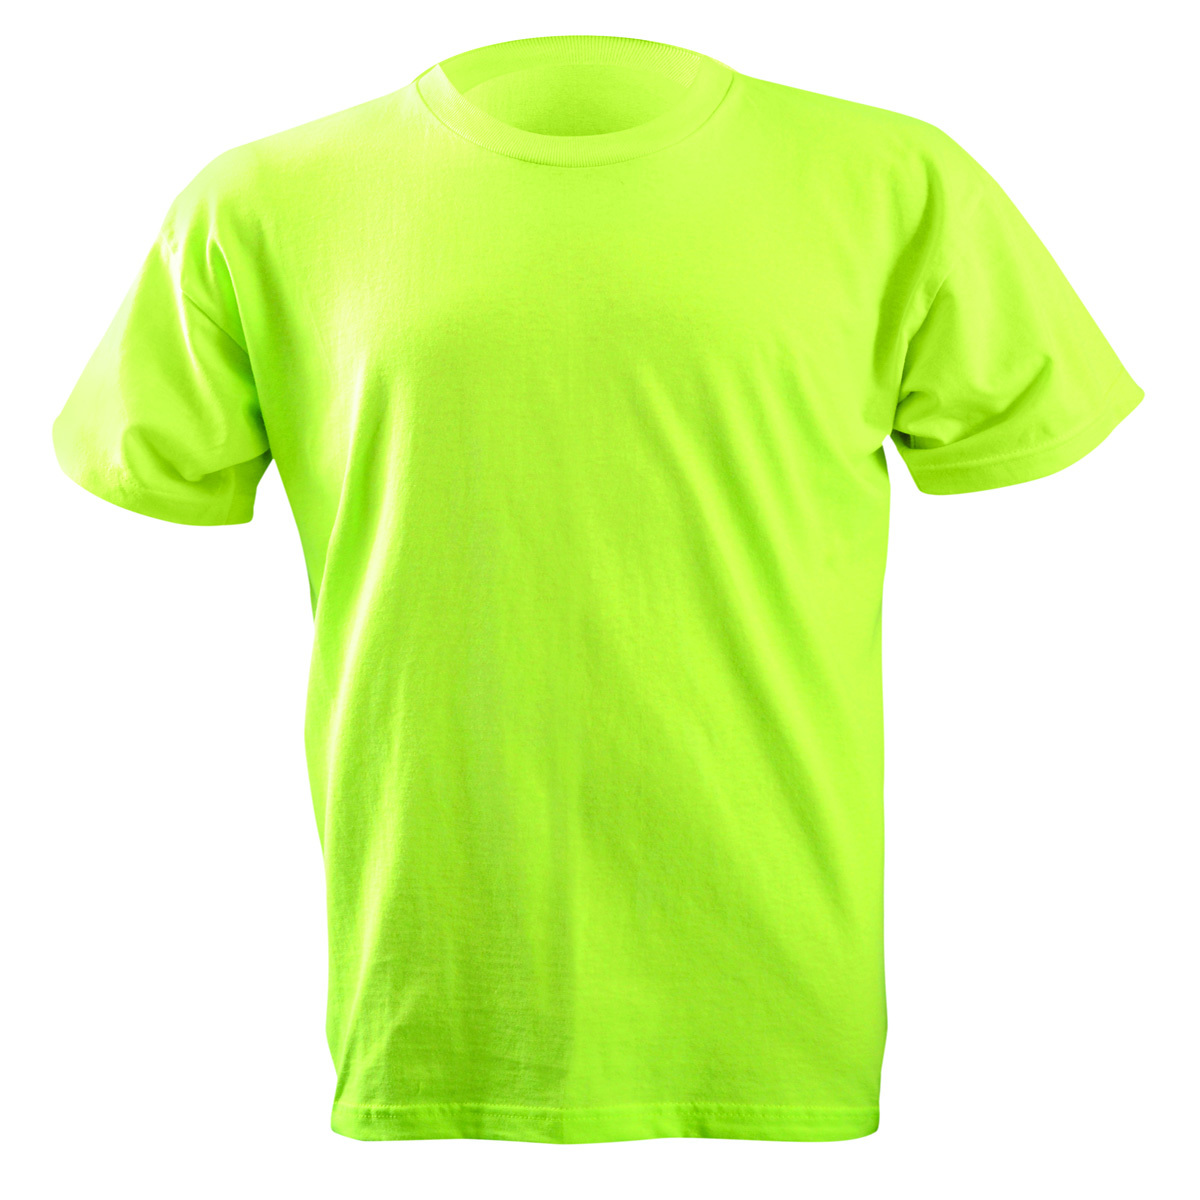 OccuNomix X-Large Yellow 6 Ounce Cotton T-Shirt